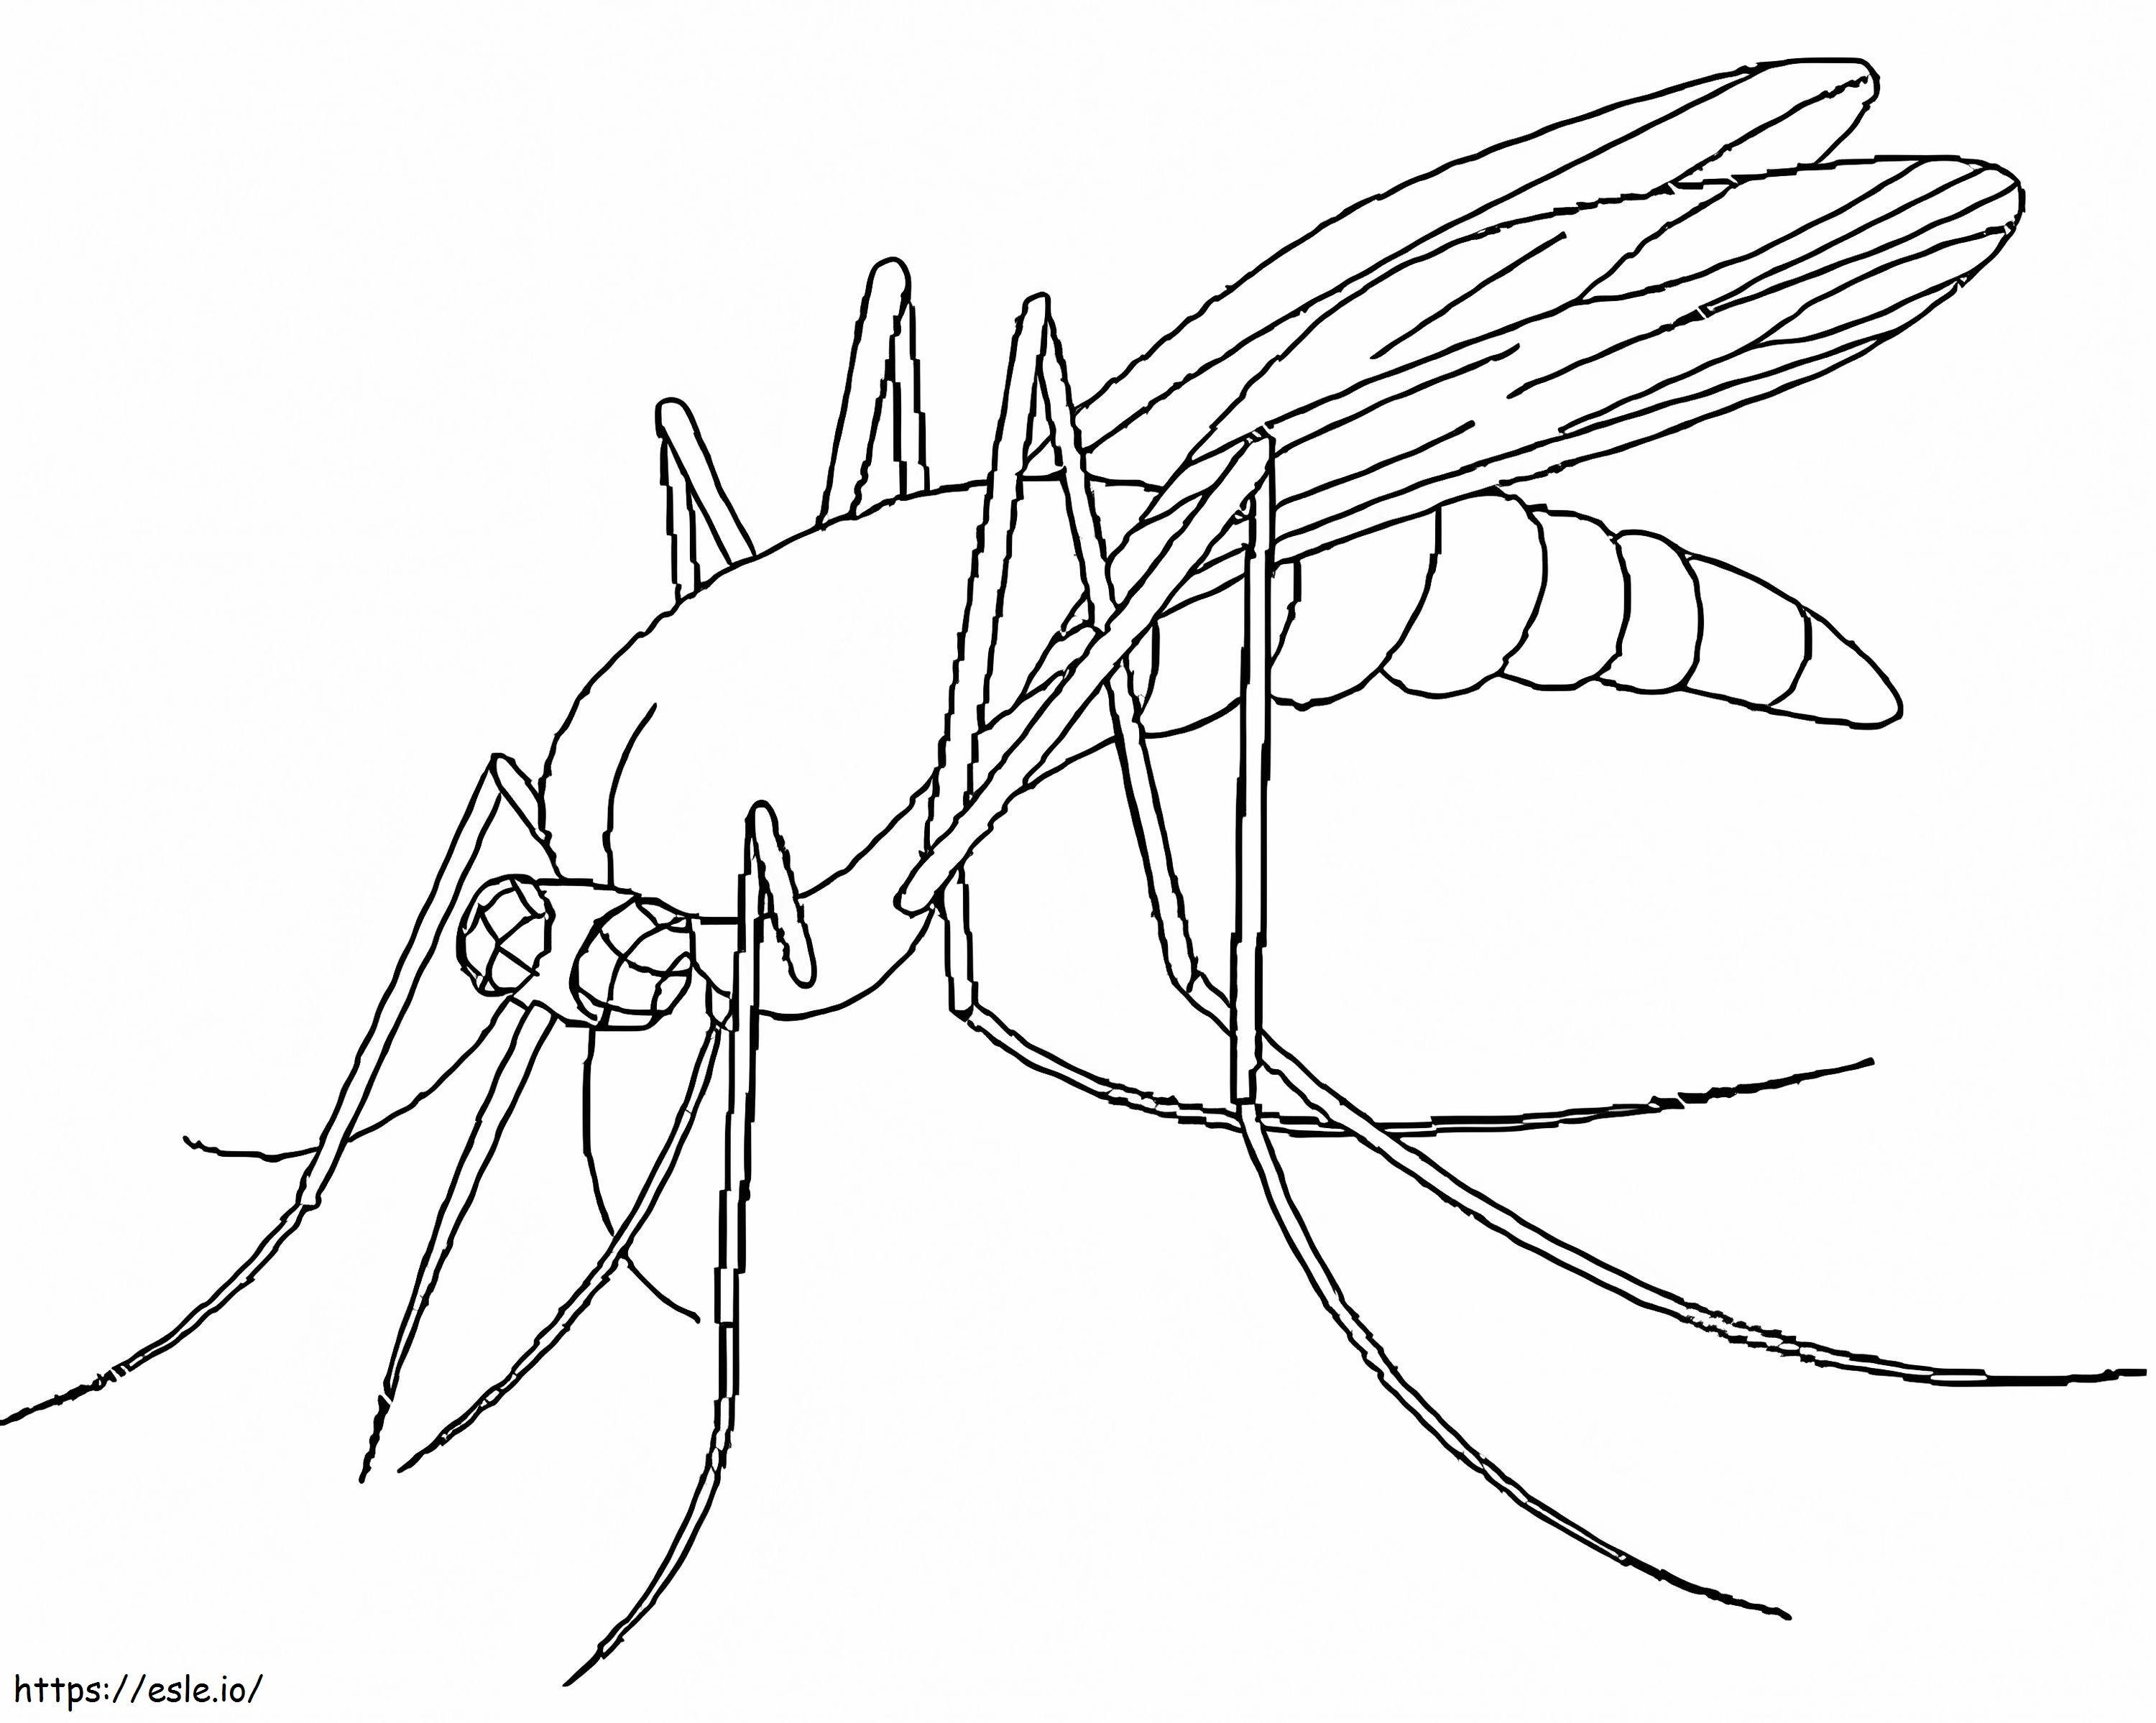 Creepy Mosquito coloring page